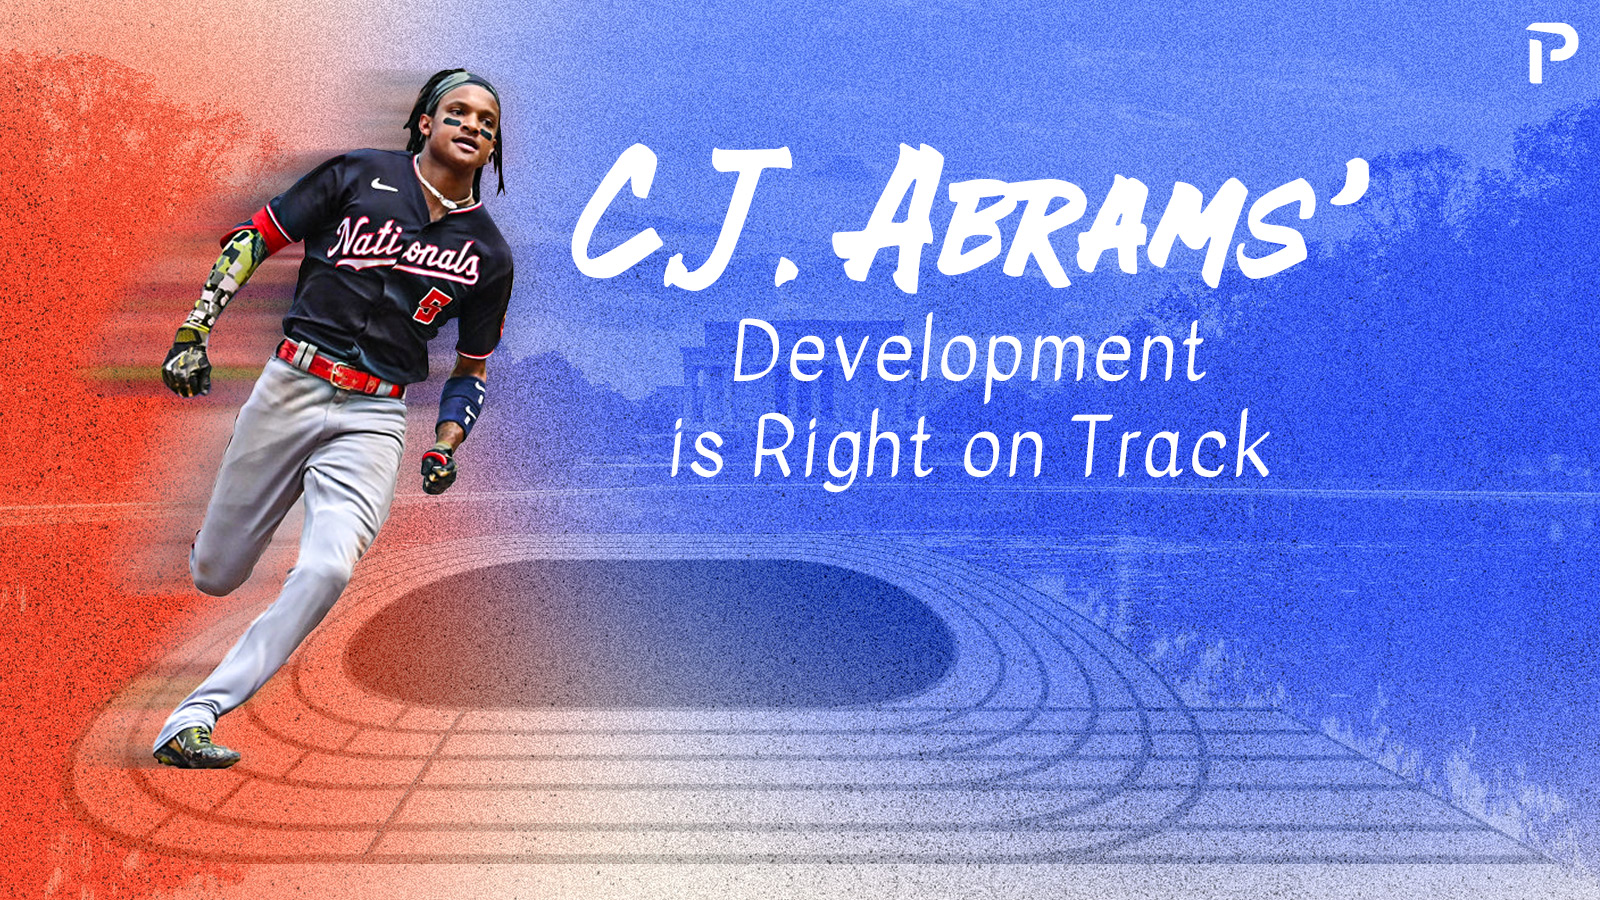 CJ Abrams - MLB Shortstop - News, Stats, Bio and more - The Athletic